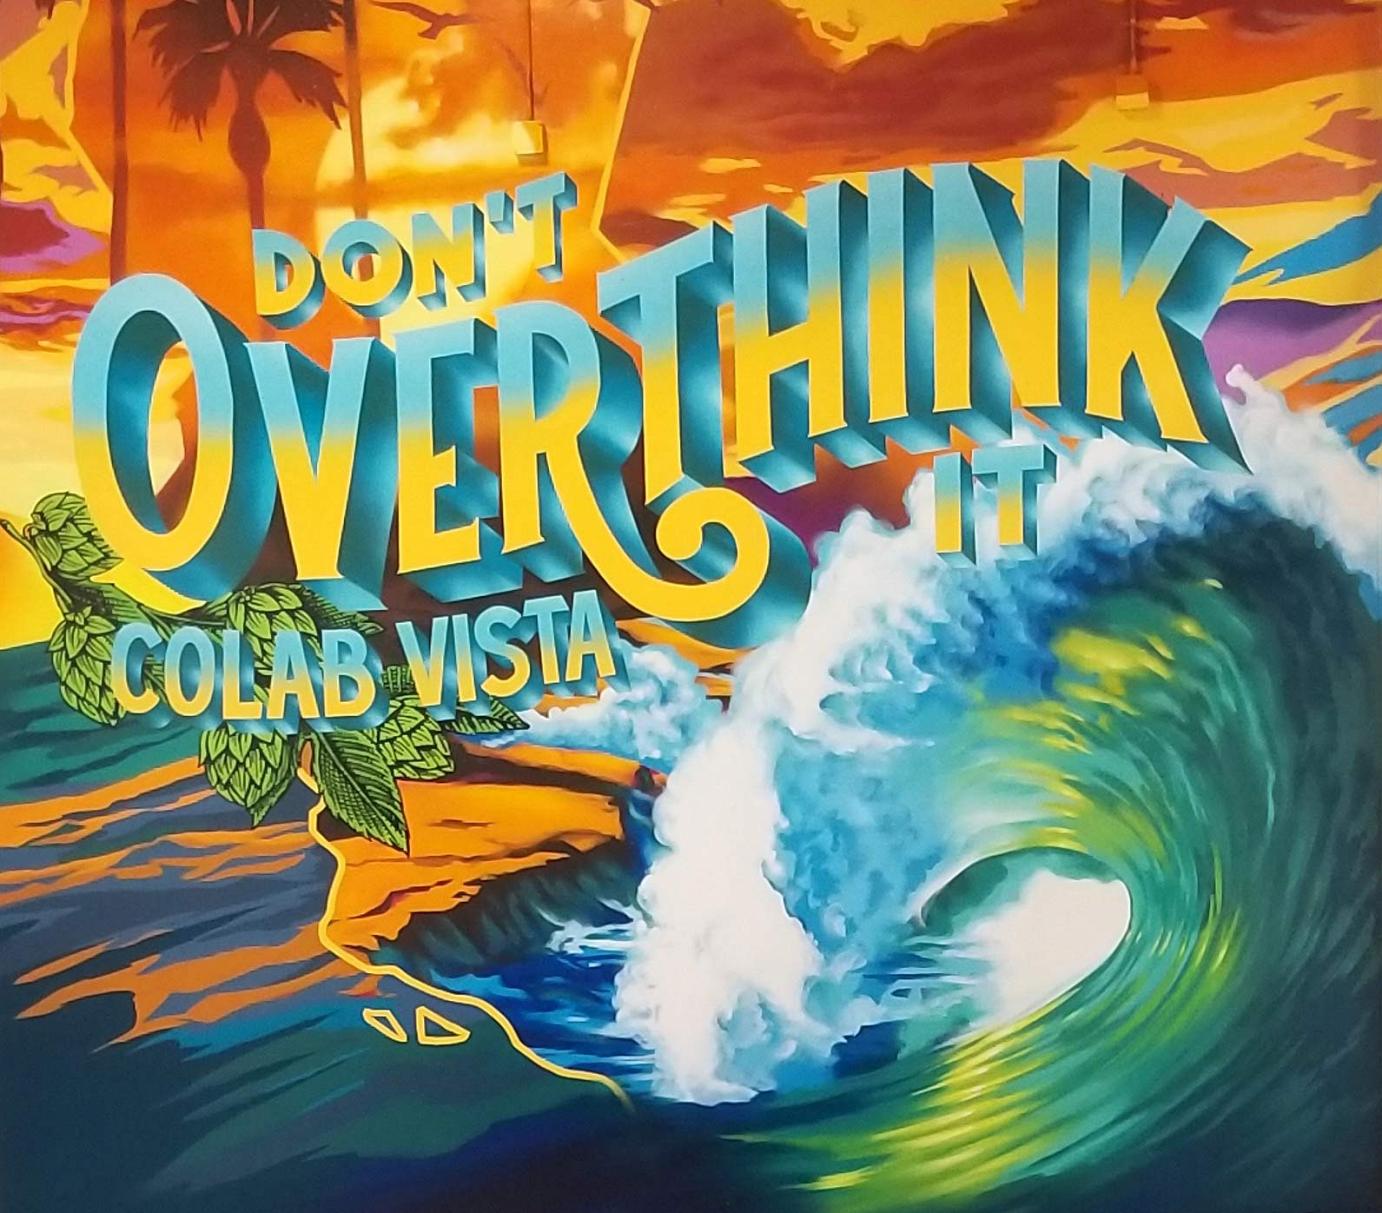 dont overthink it